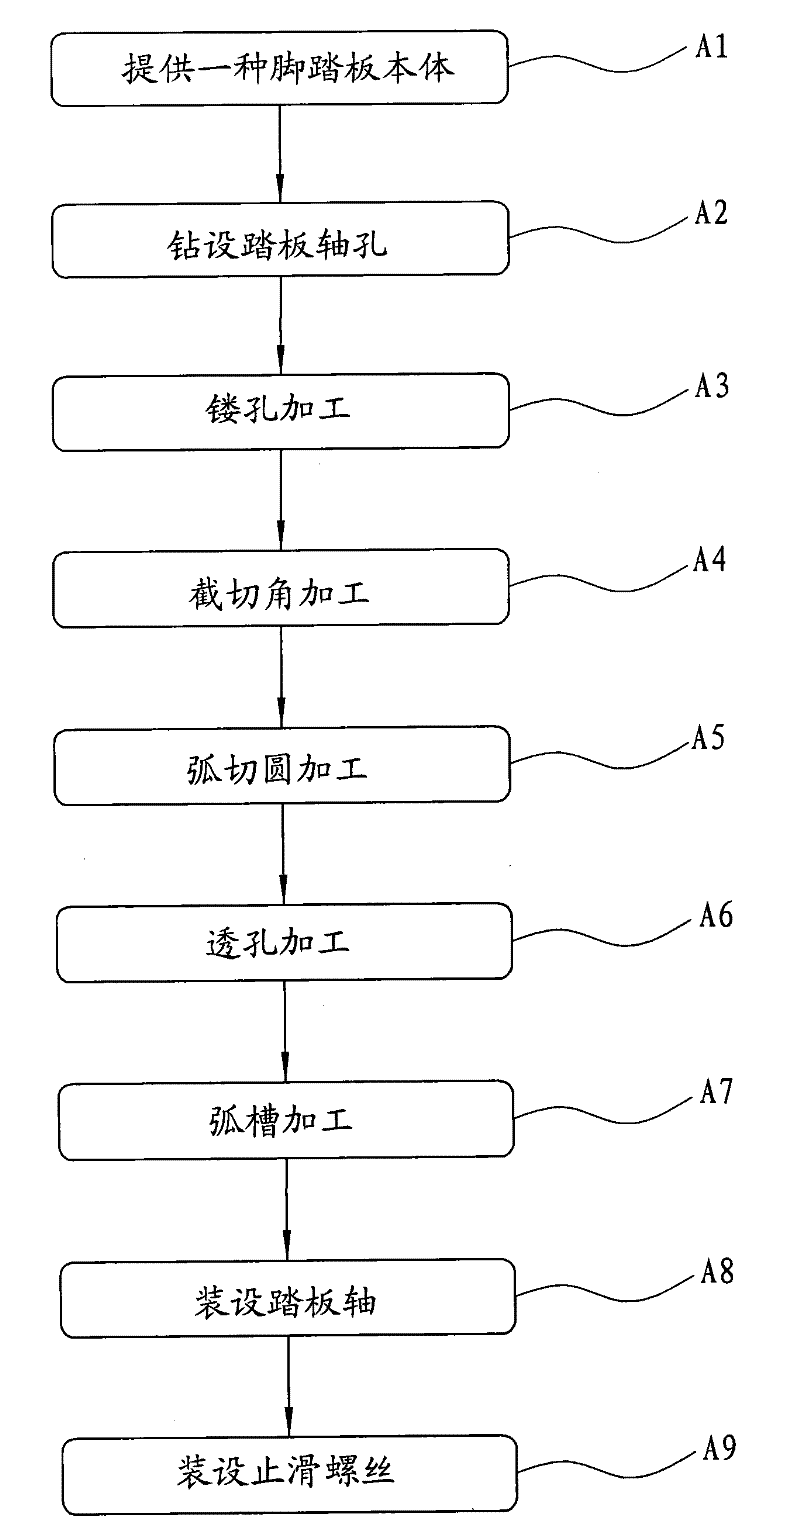 Pedal capable of improving stepping efficiency and manufacturing method thereof